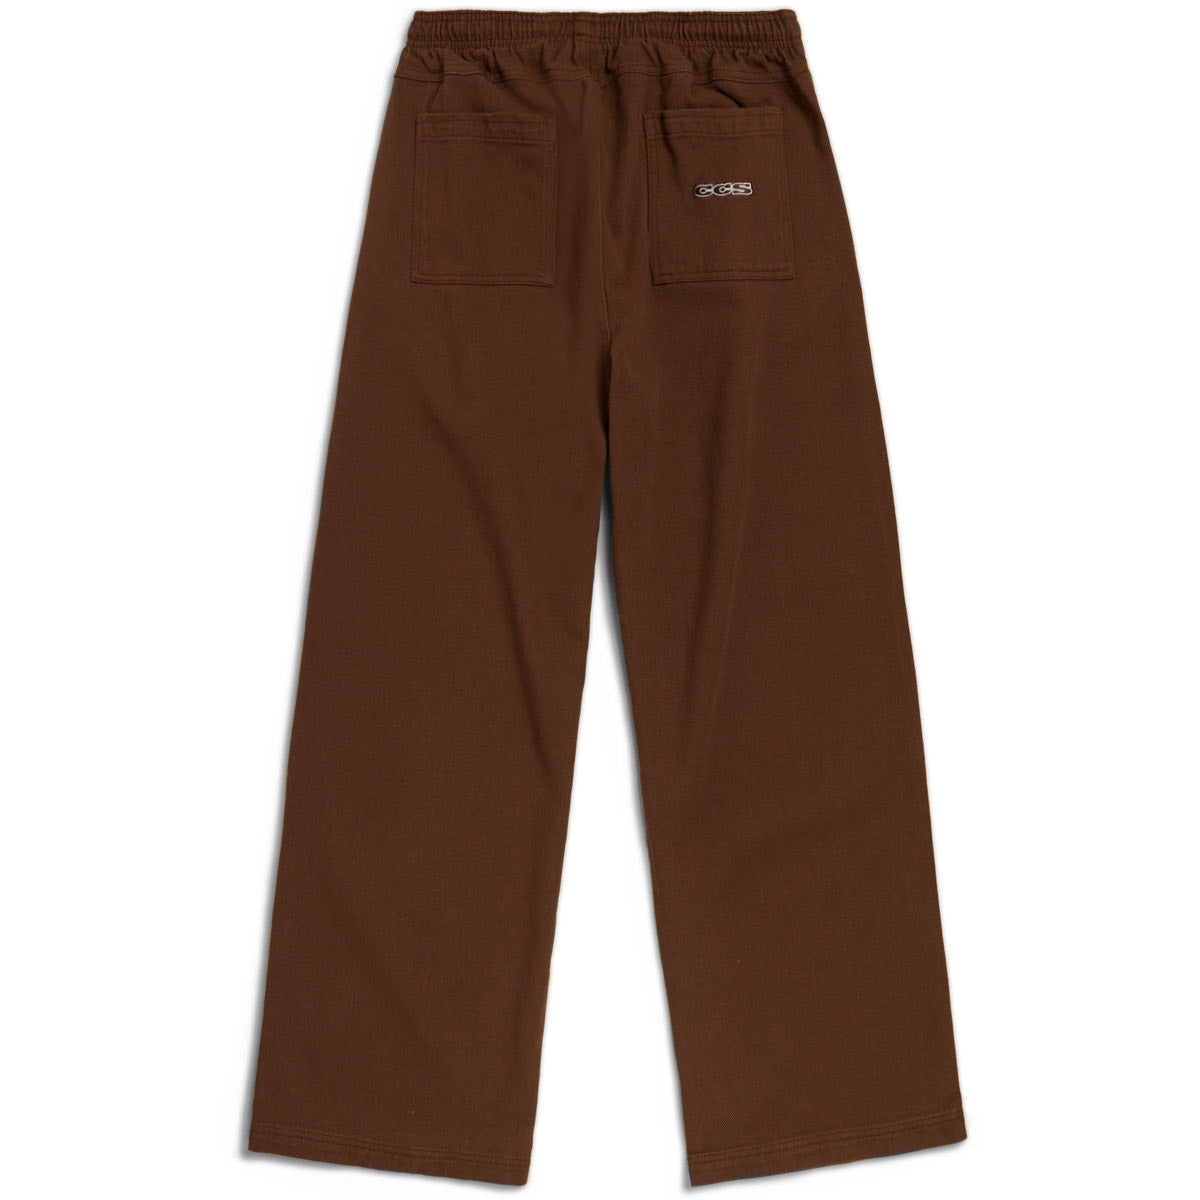 CCS Easy Twill Pants - New Brown image 6